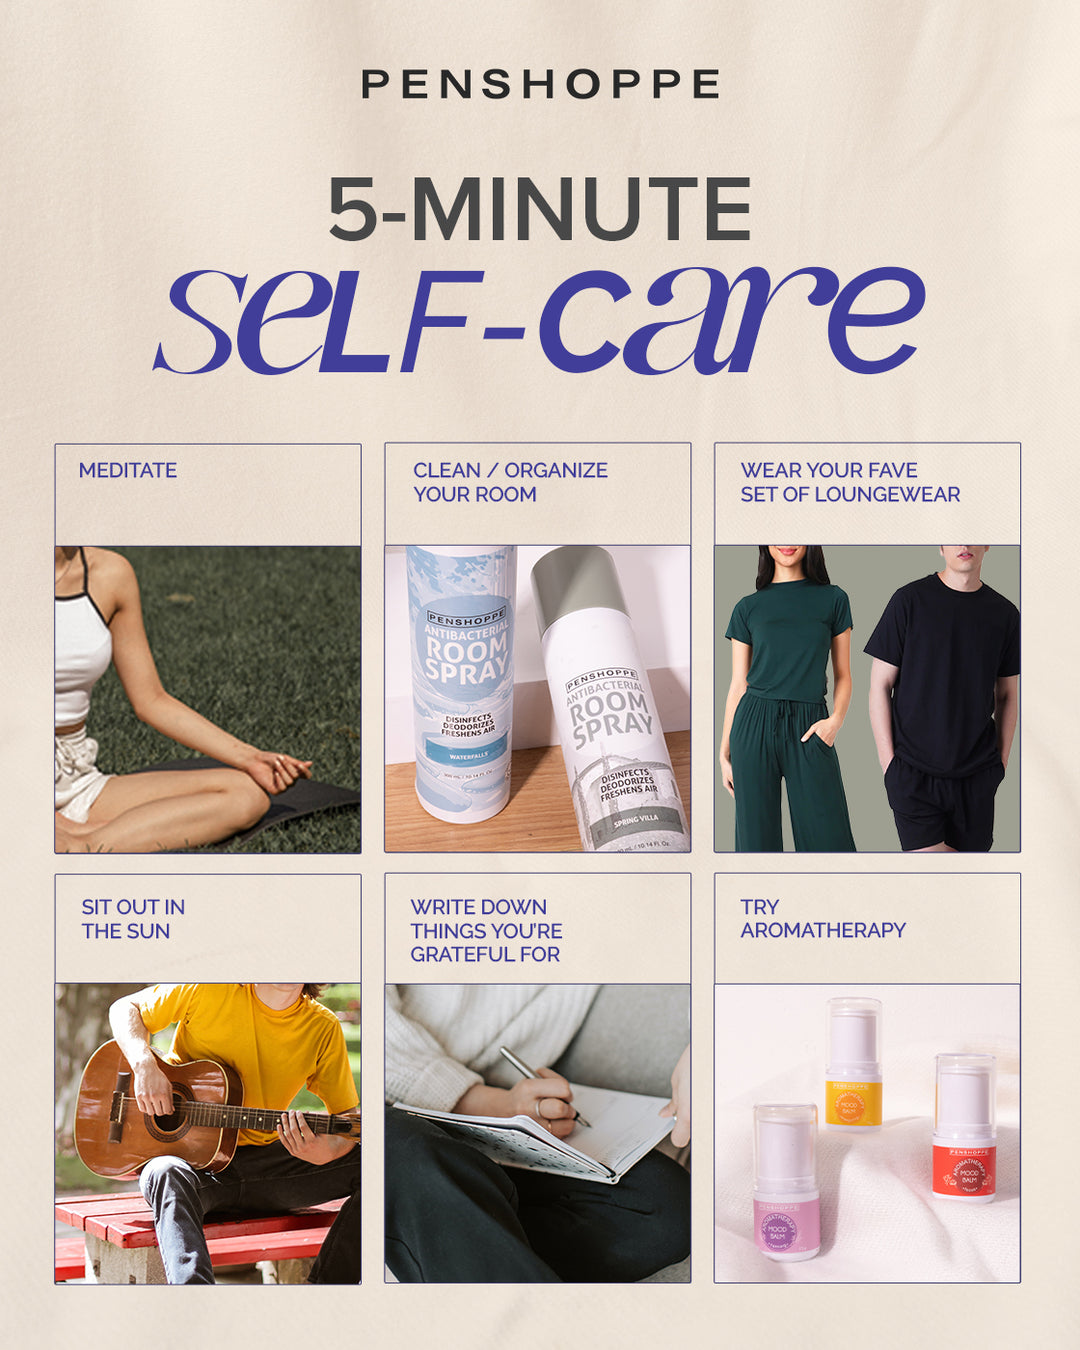 Make Every Day A Self-Care Day!